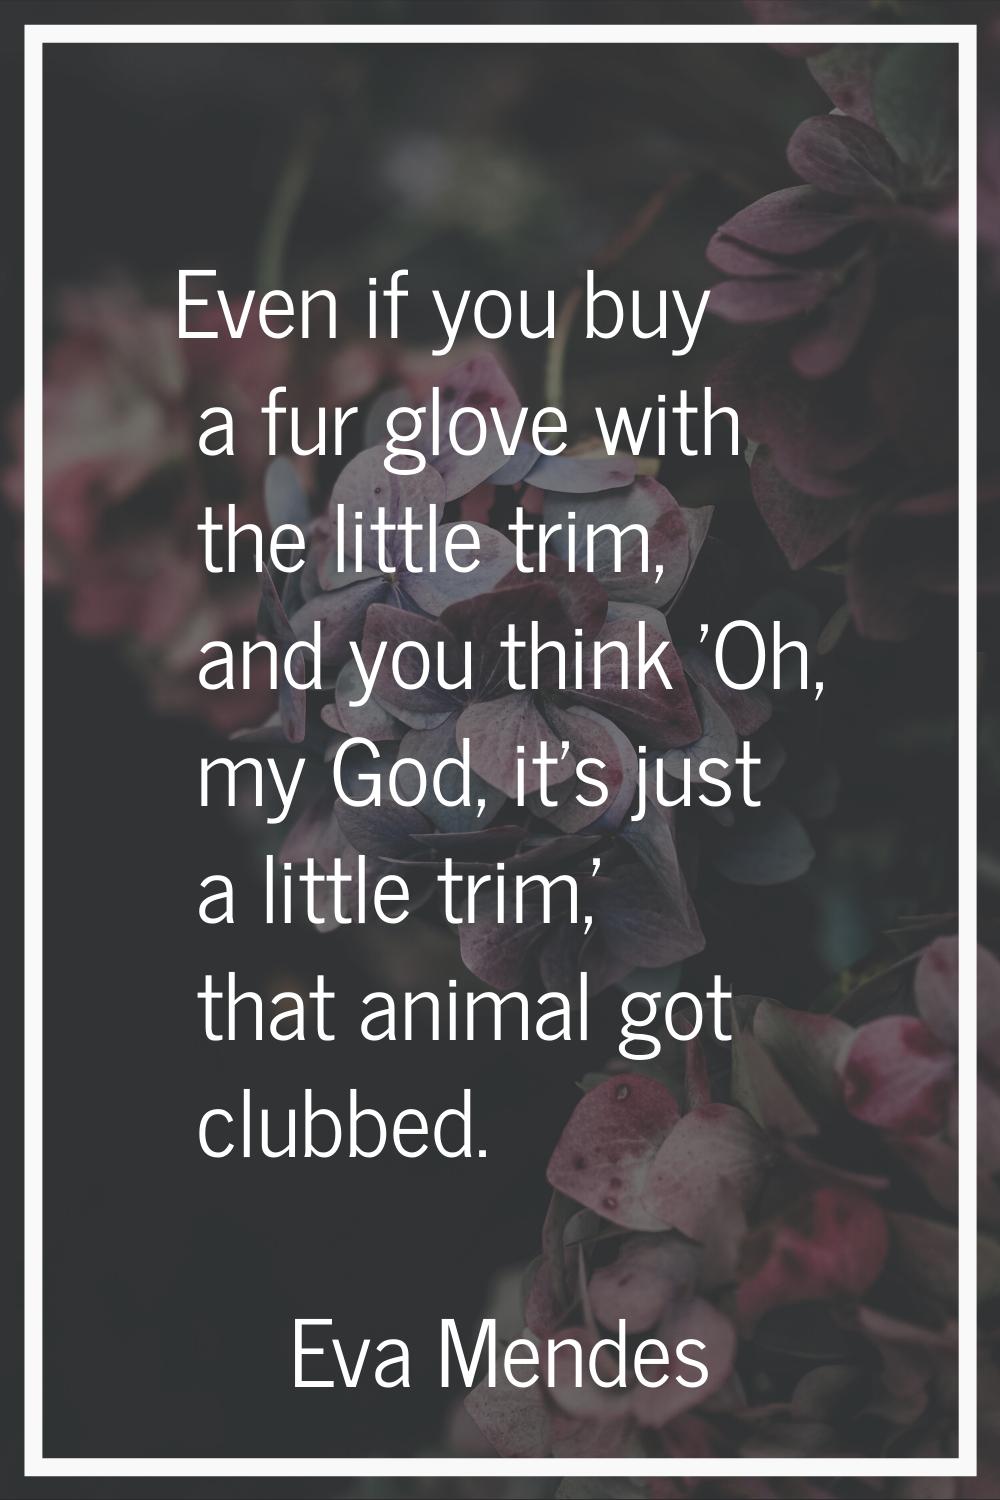 Even if you buy a fur glove with the little trim, and you think 'Oh, my God, it's just a little tri